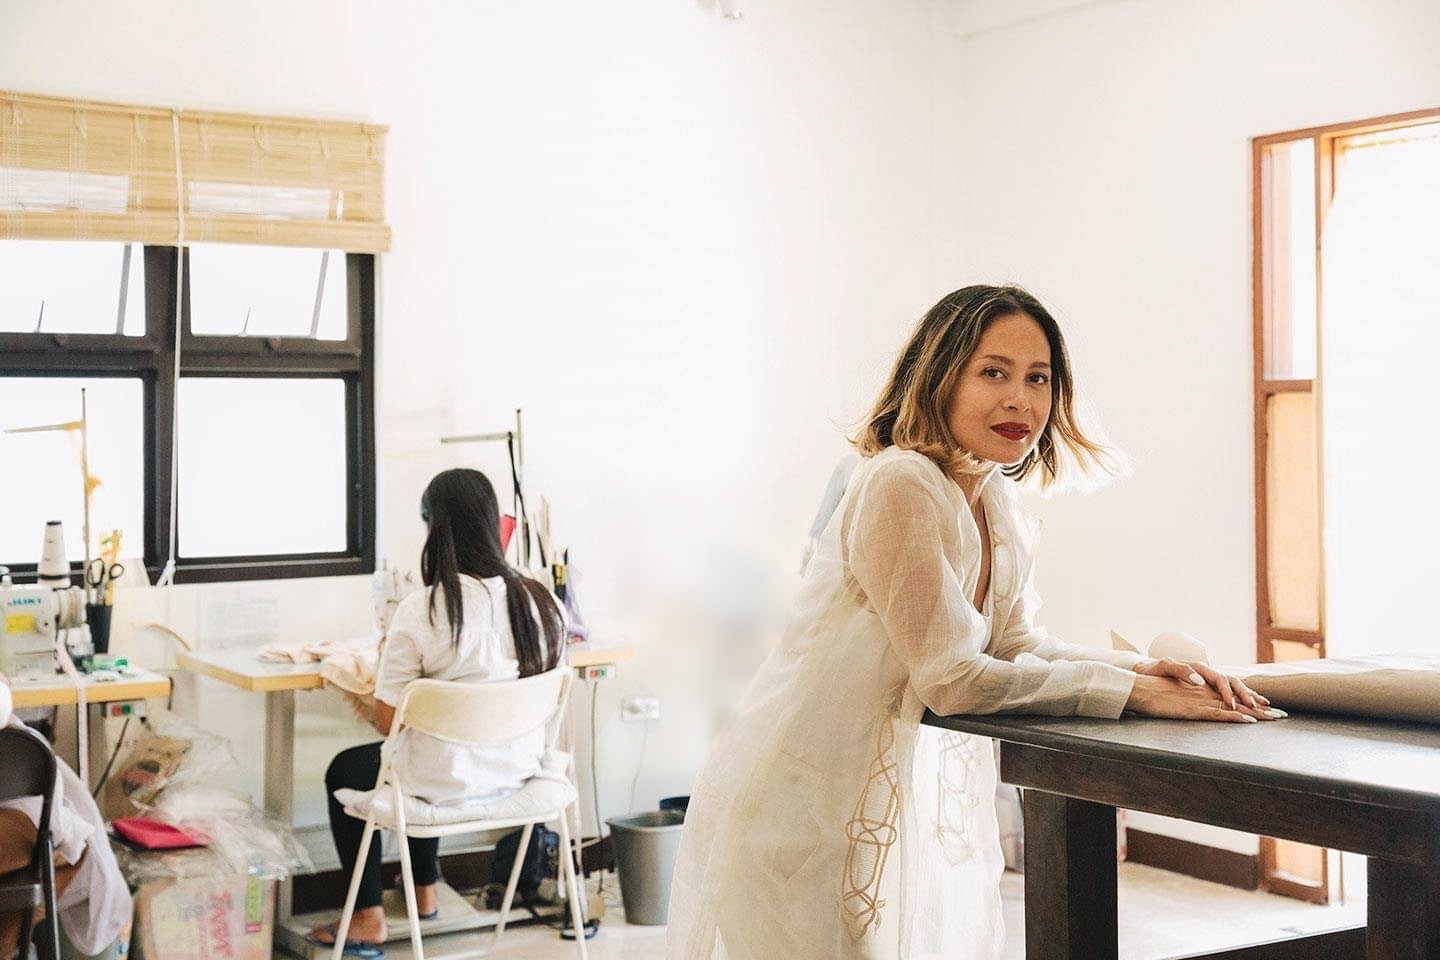 This image shows the fashion designer in her studio